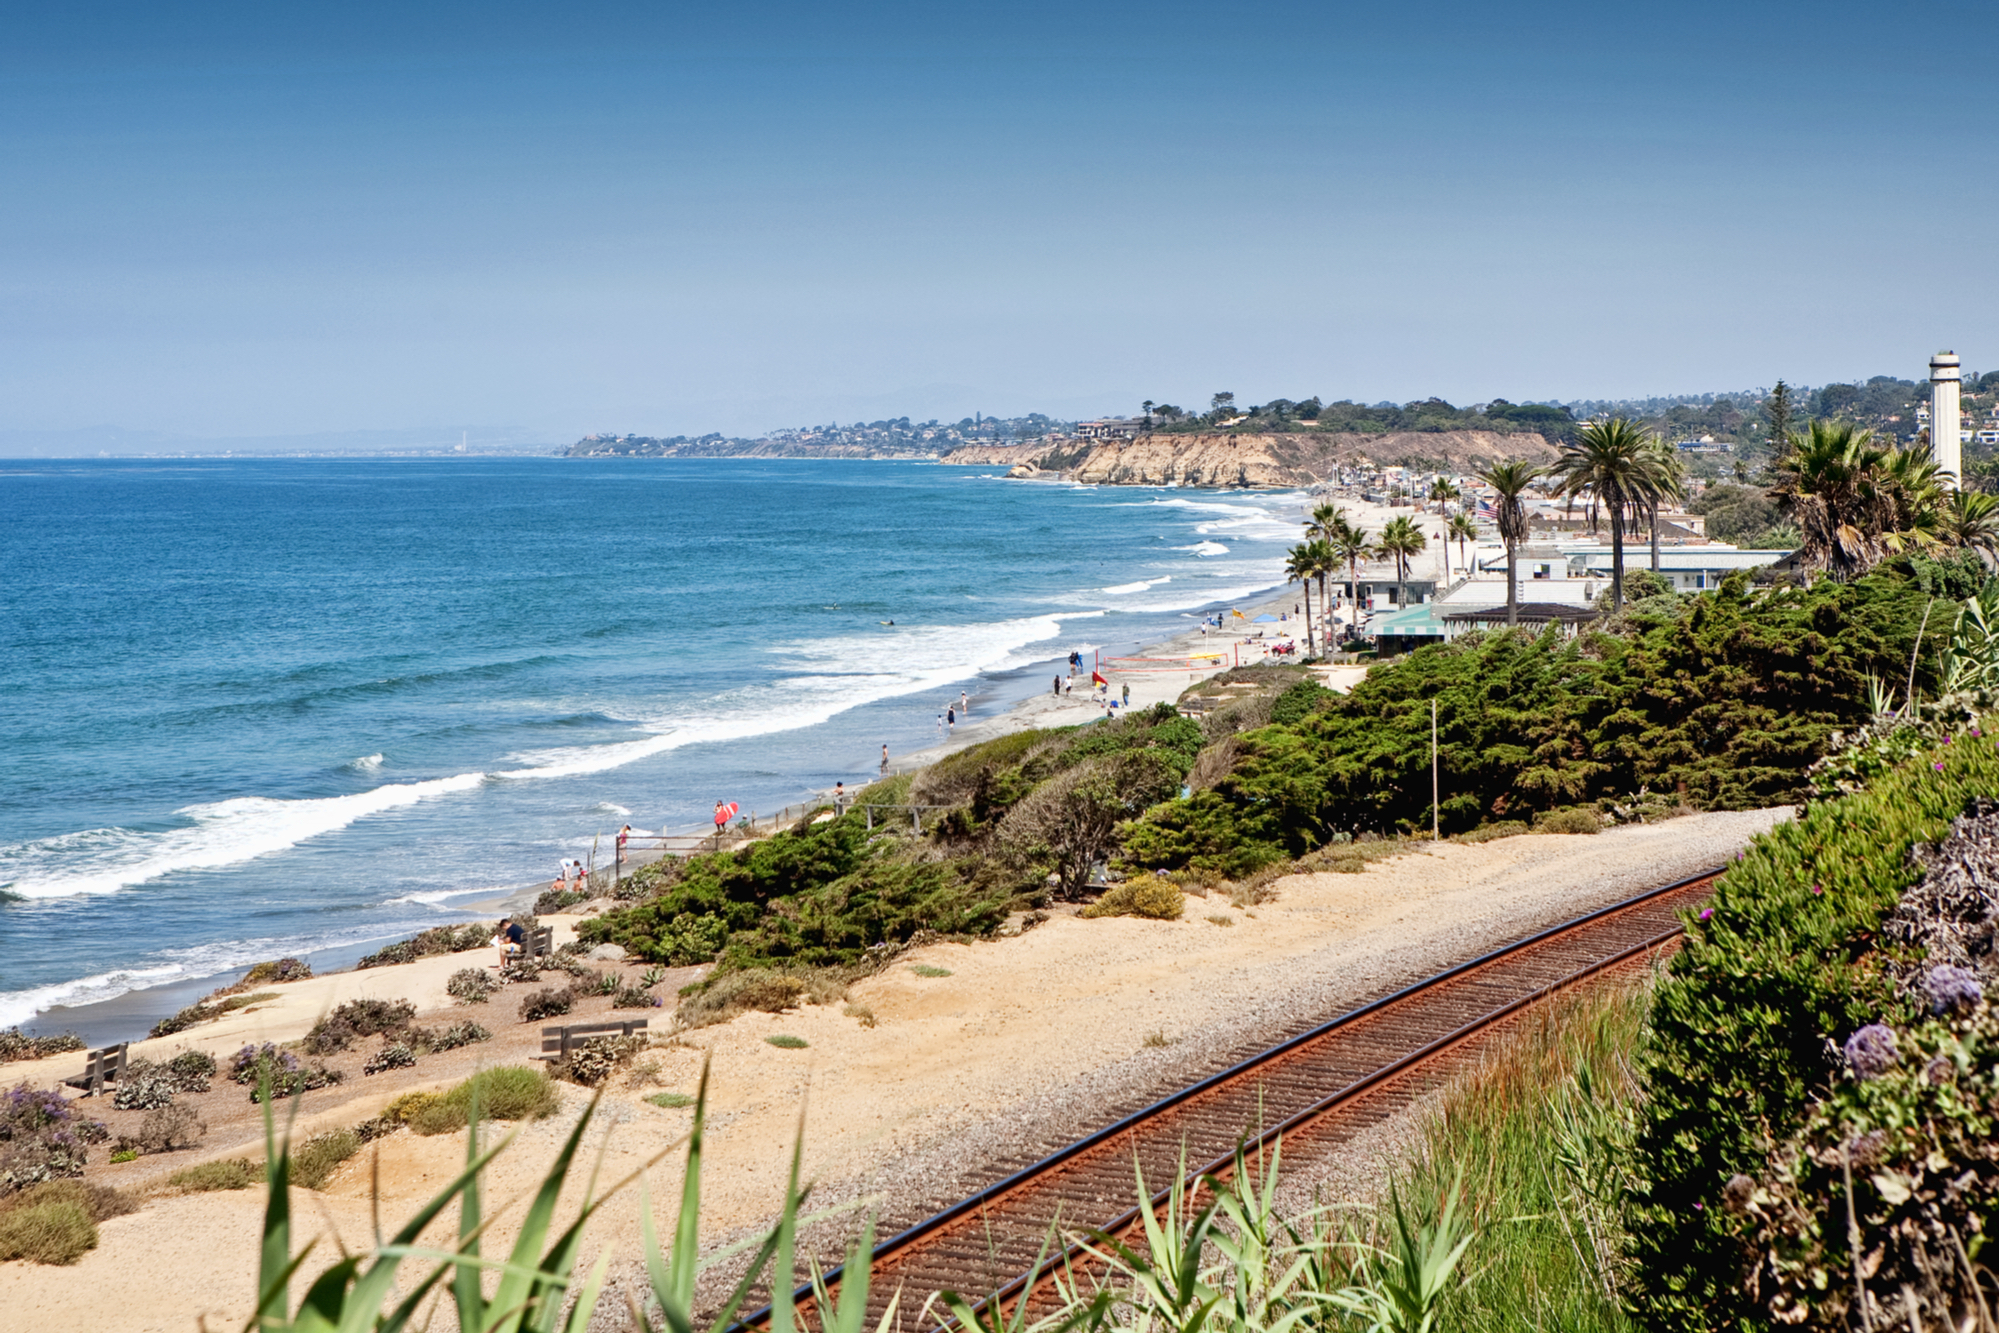 Help us save Del Mar. Join today.